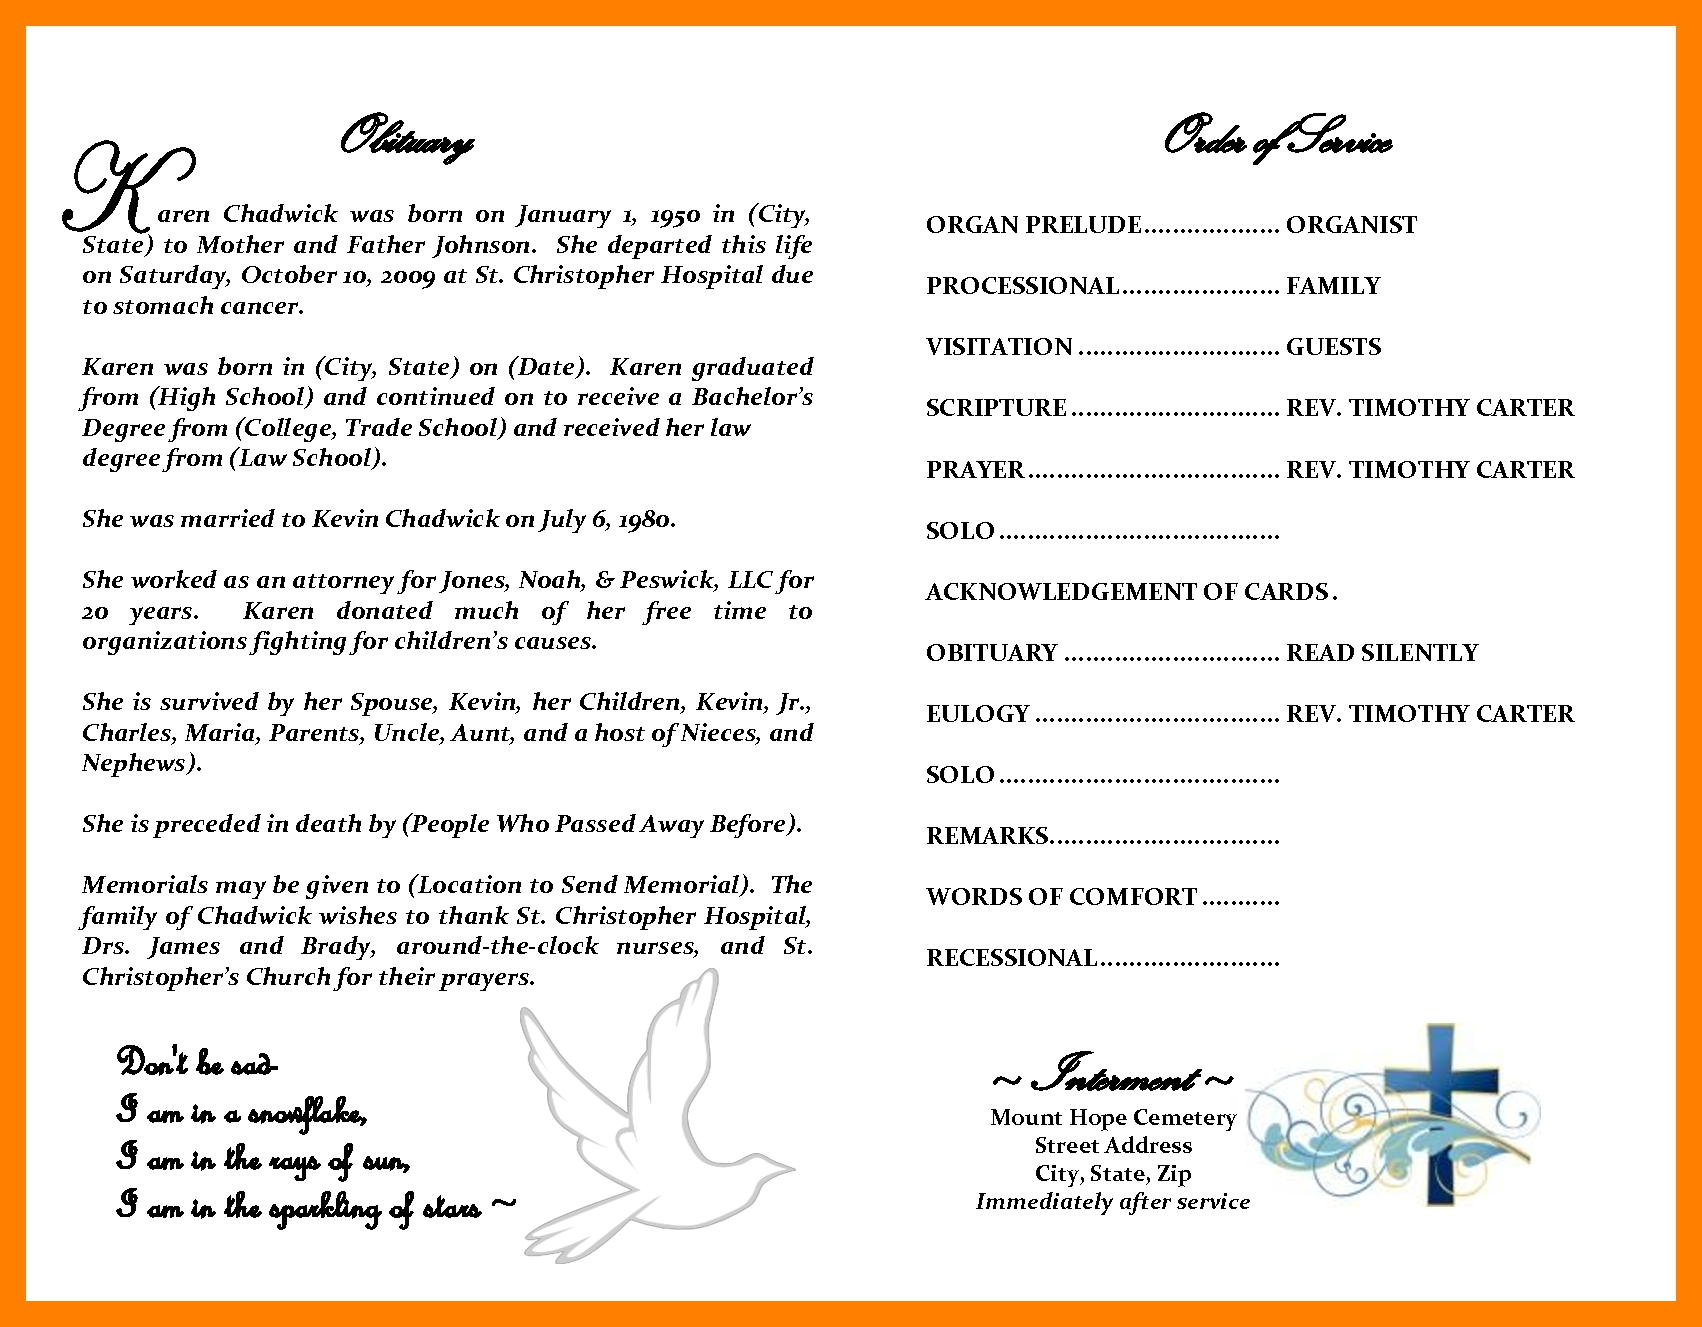 fake obituary template - Dicim With Regard To Fill In The Blank Obituary Template